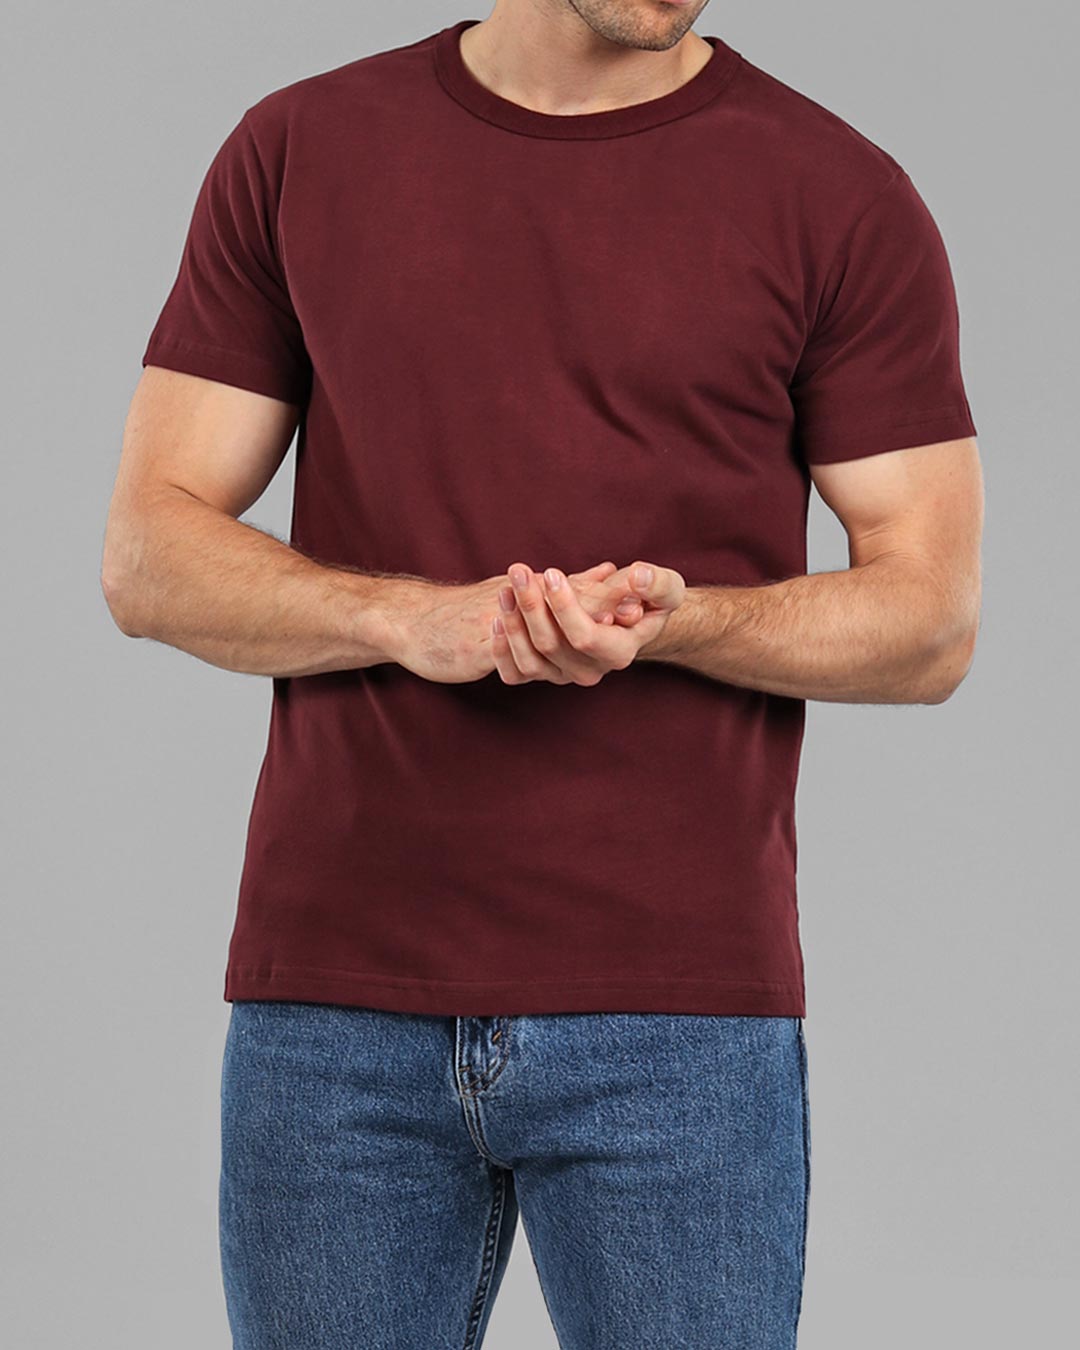 Men's Burgundy Crew Neck Fitted T-Shirt | Muscle Fit Basics